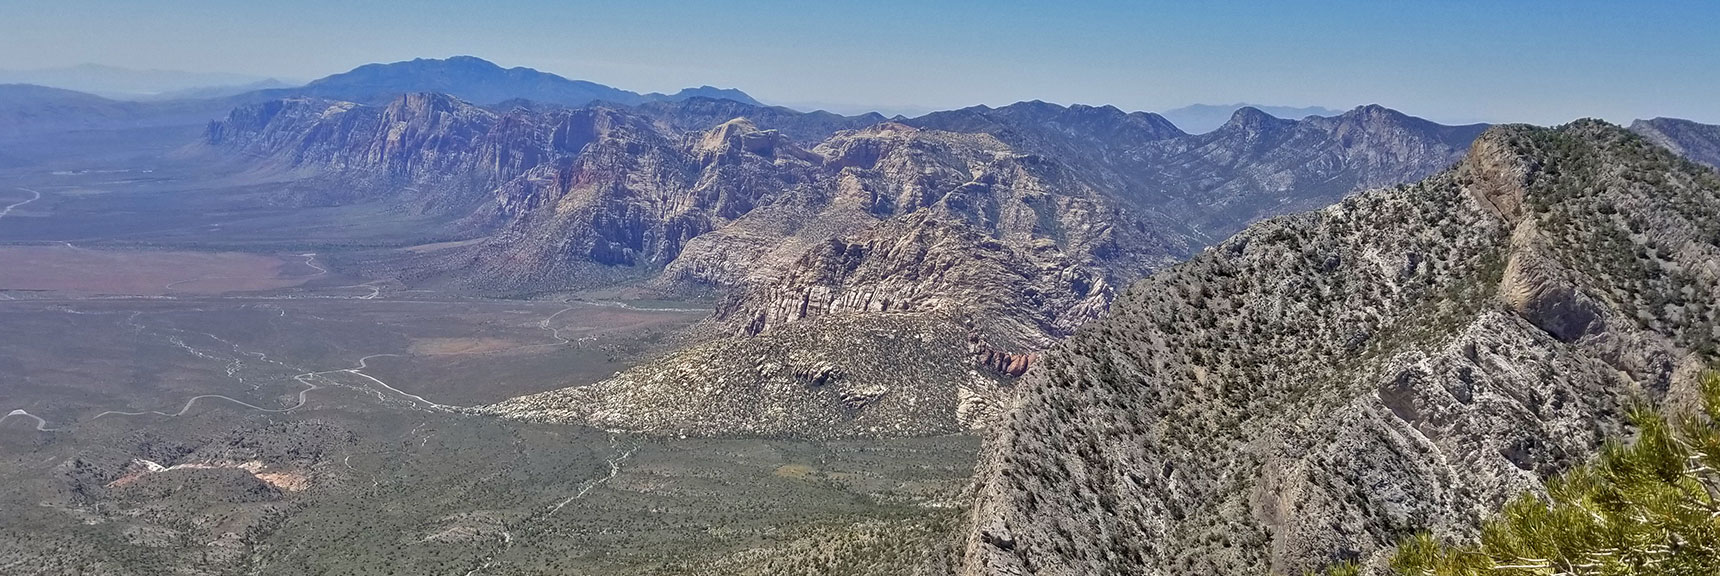 Red Rock National Park Viewed from Keystone Thrust West of El Padre Mountain, La Madre Mountains Wilderness, Nevada